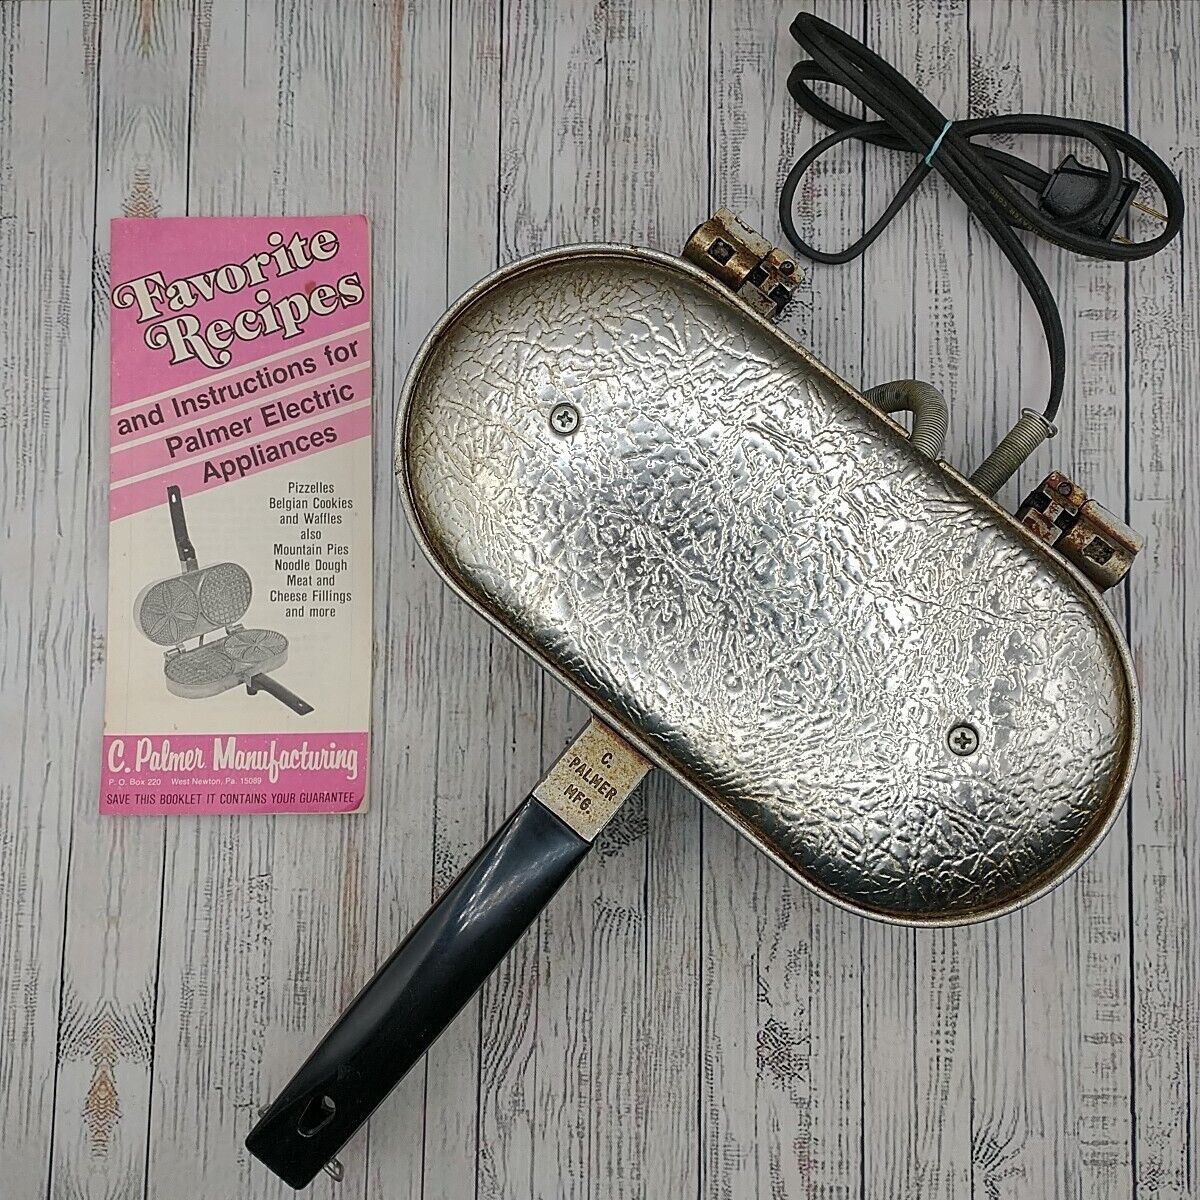 Palmer Electric Pizzelle Iron Italian Waffle Cookie Maker Model 1000 & Box USA